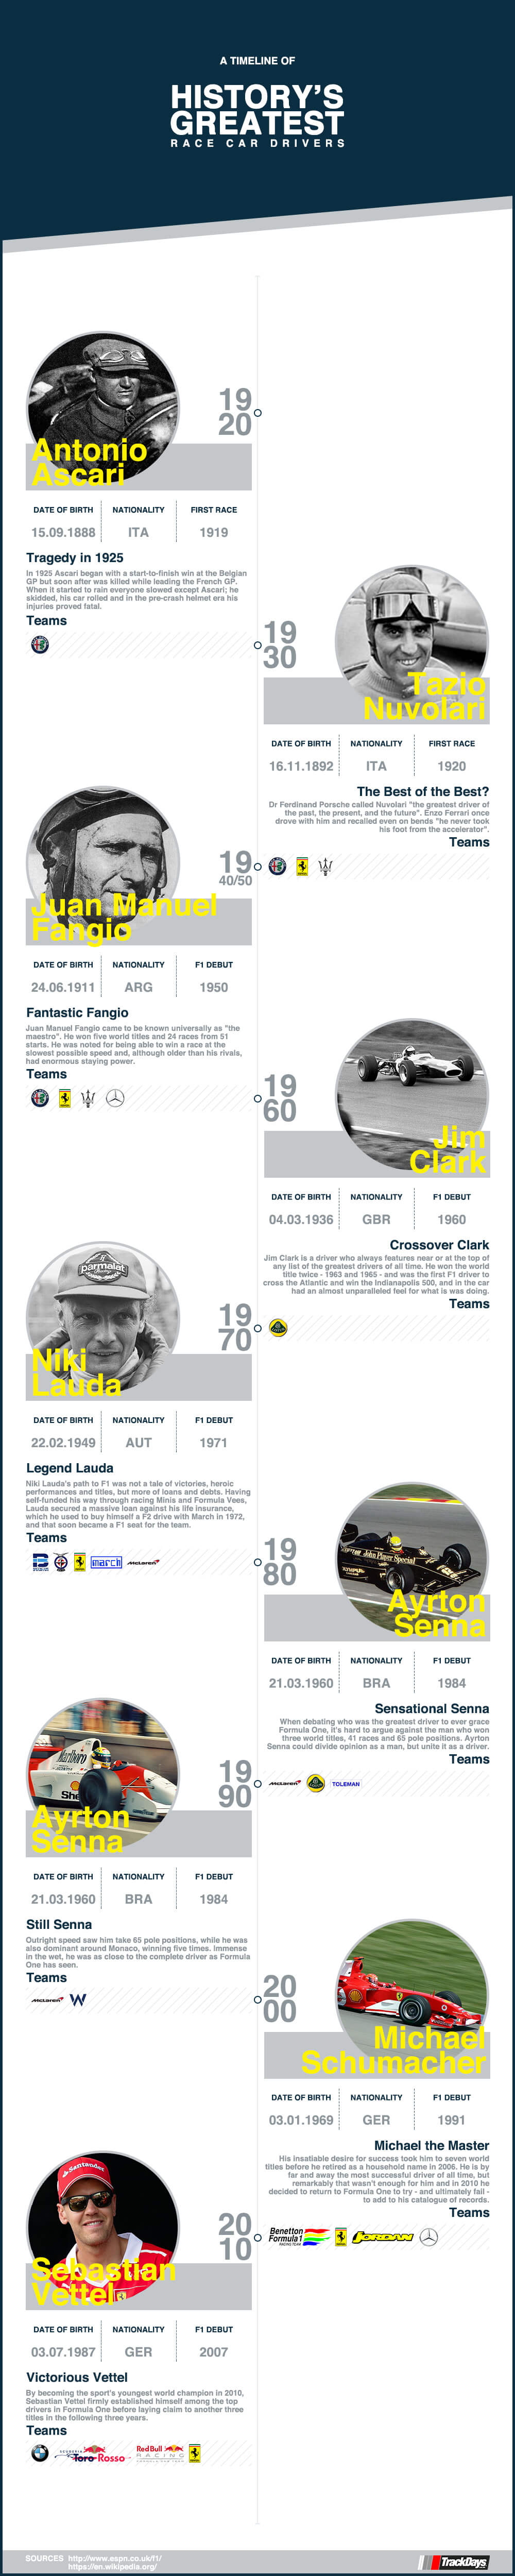 History's Greatest Racing Drivers - A Timeline